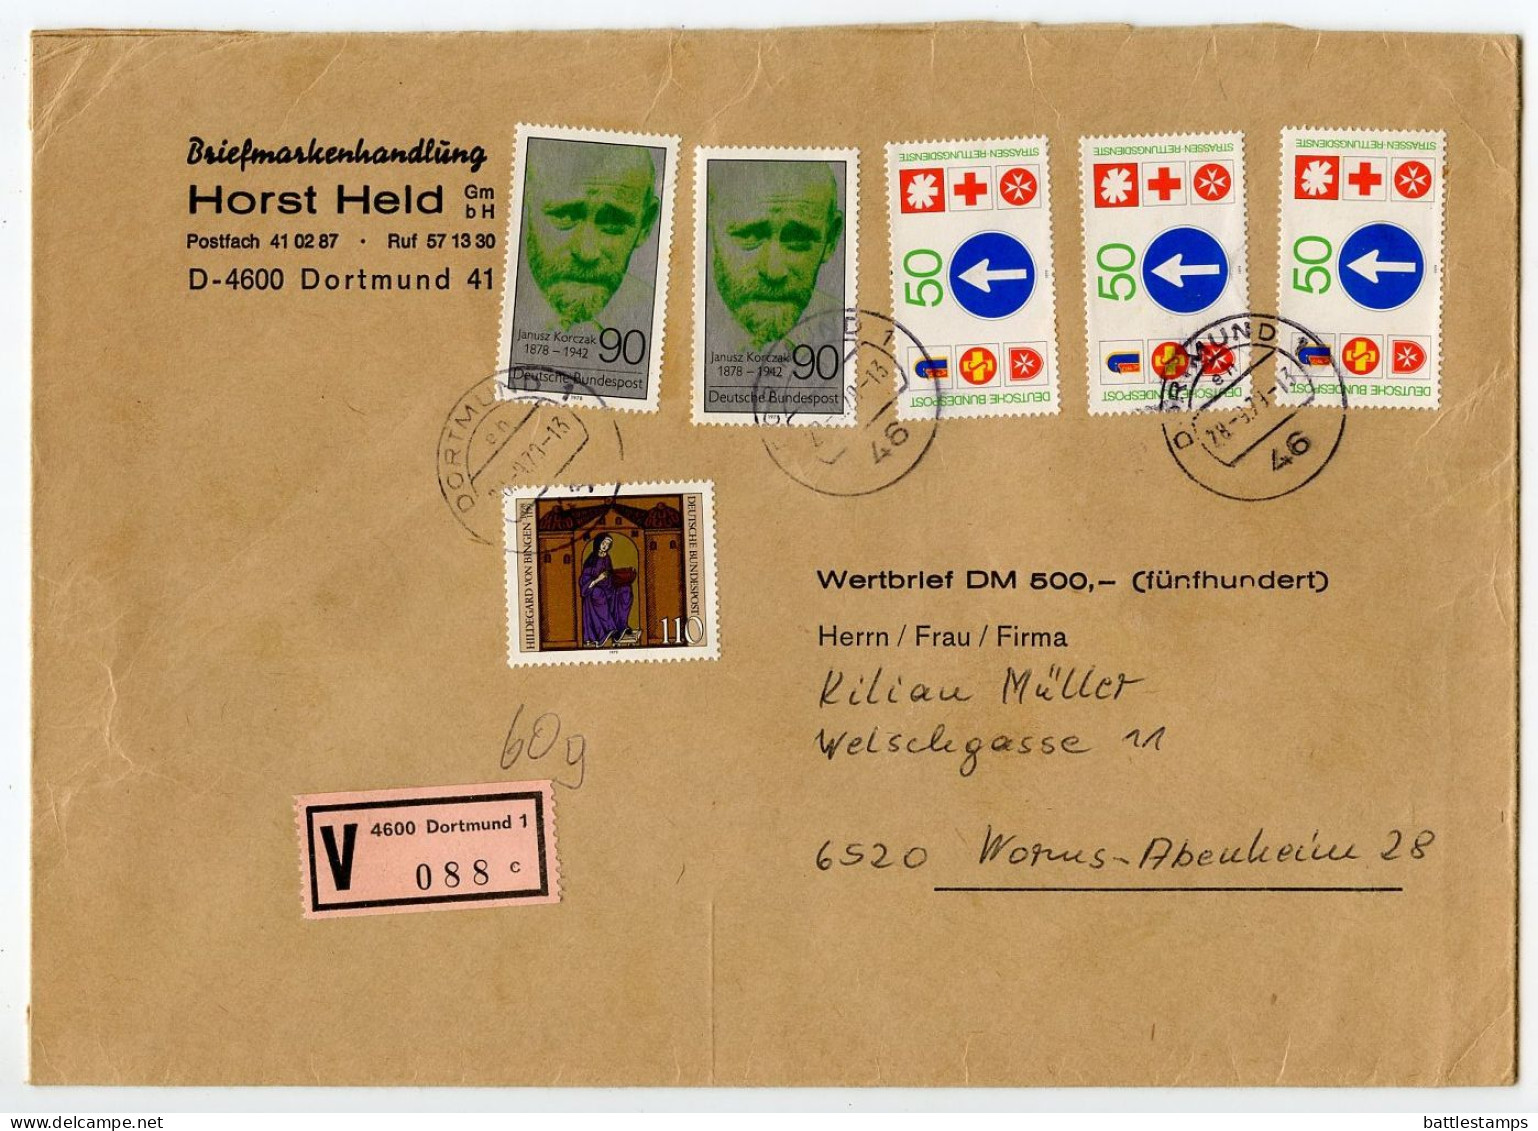 Germany, West 1979 Insured V-Label Cover; Dortmund To Worms-Abenheim; Mix Of Stamps - Covers & Documents